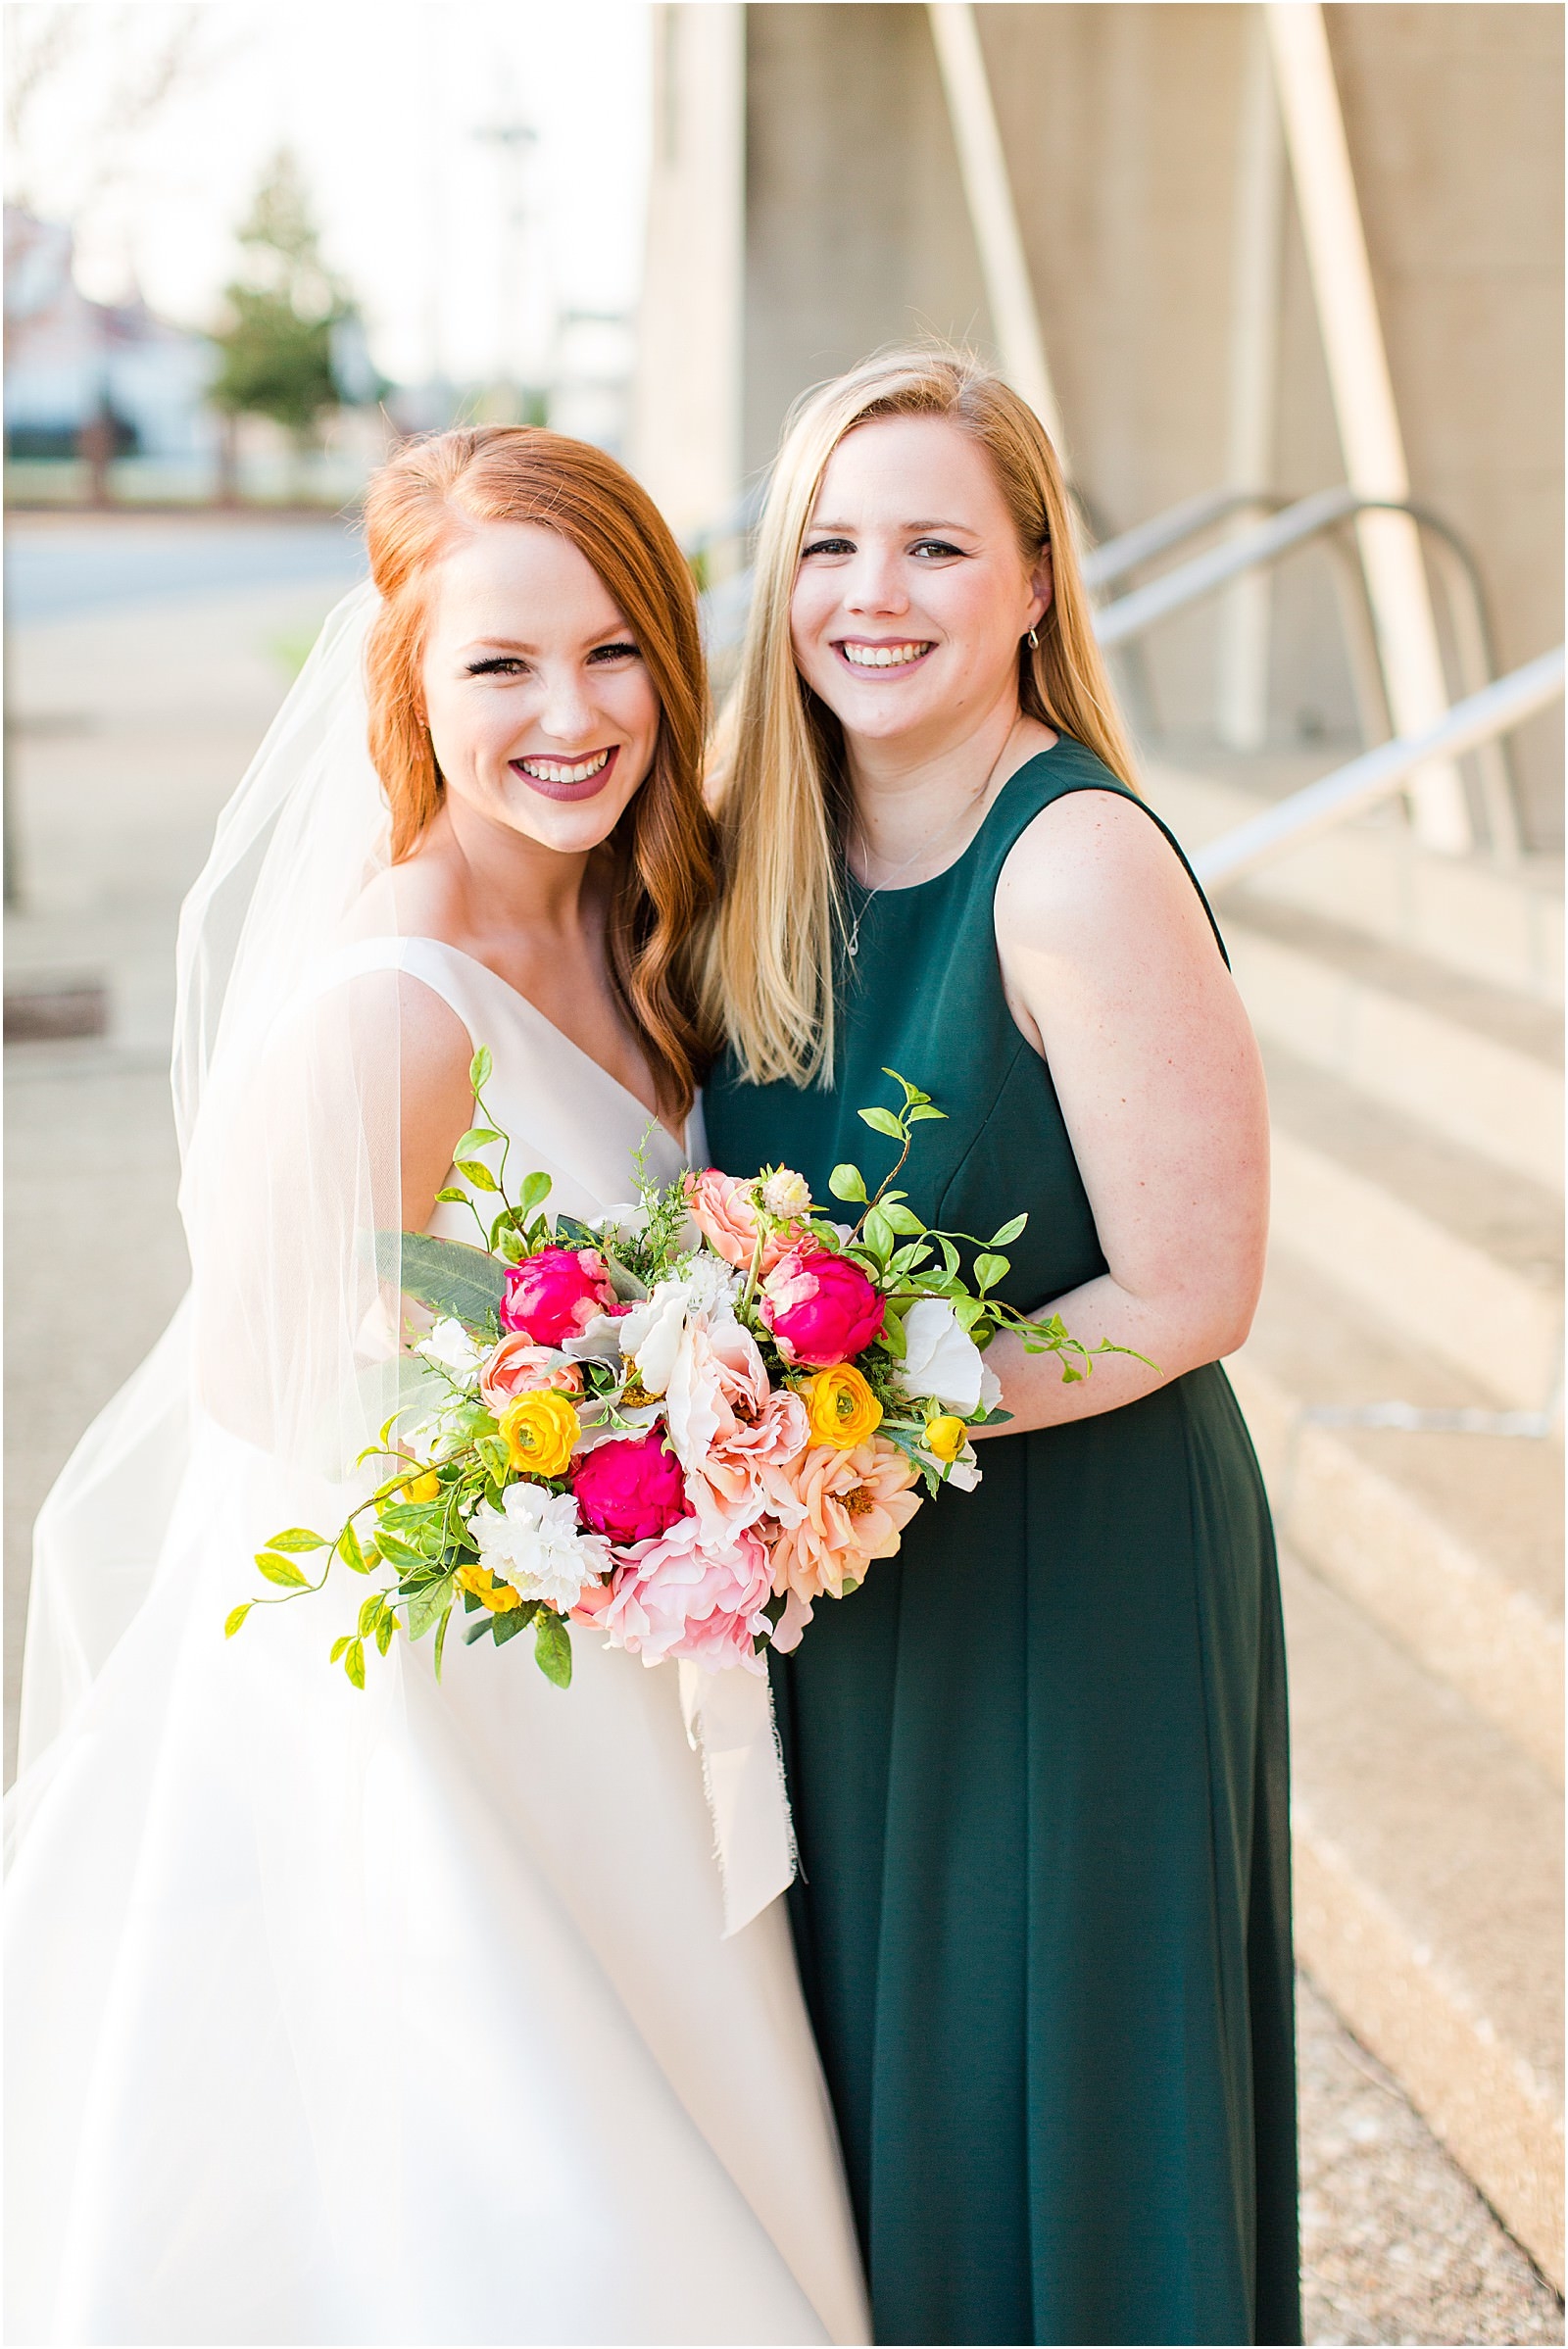 A Perfectly Intimate Wedding in Downtown Evansville Indiana | Jennah and Steve | Bret and Brandie Photography | | 0082.jpg